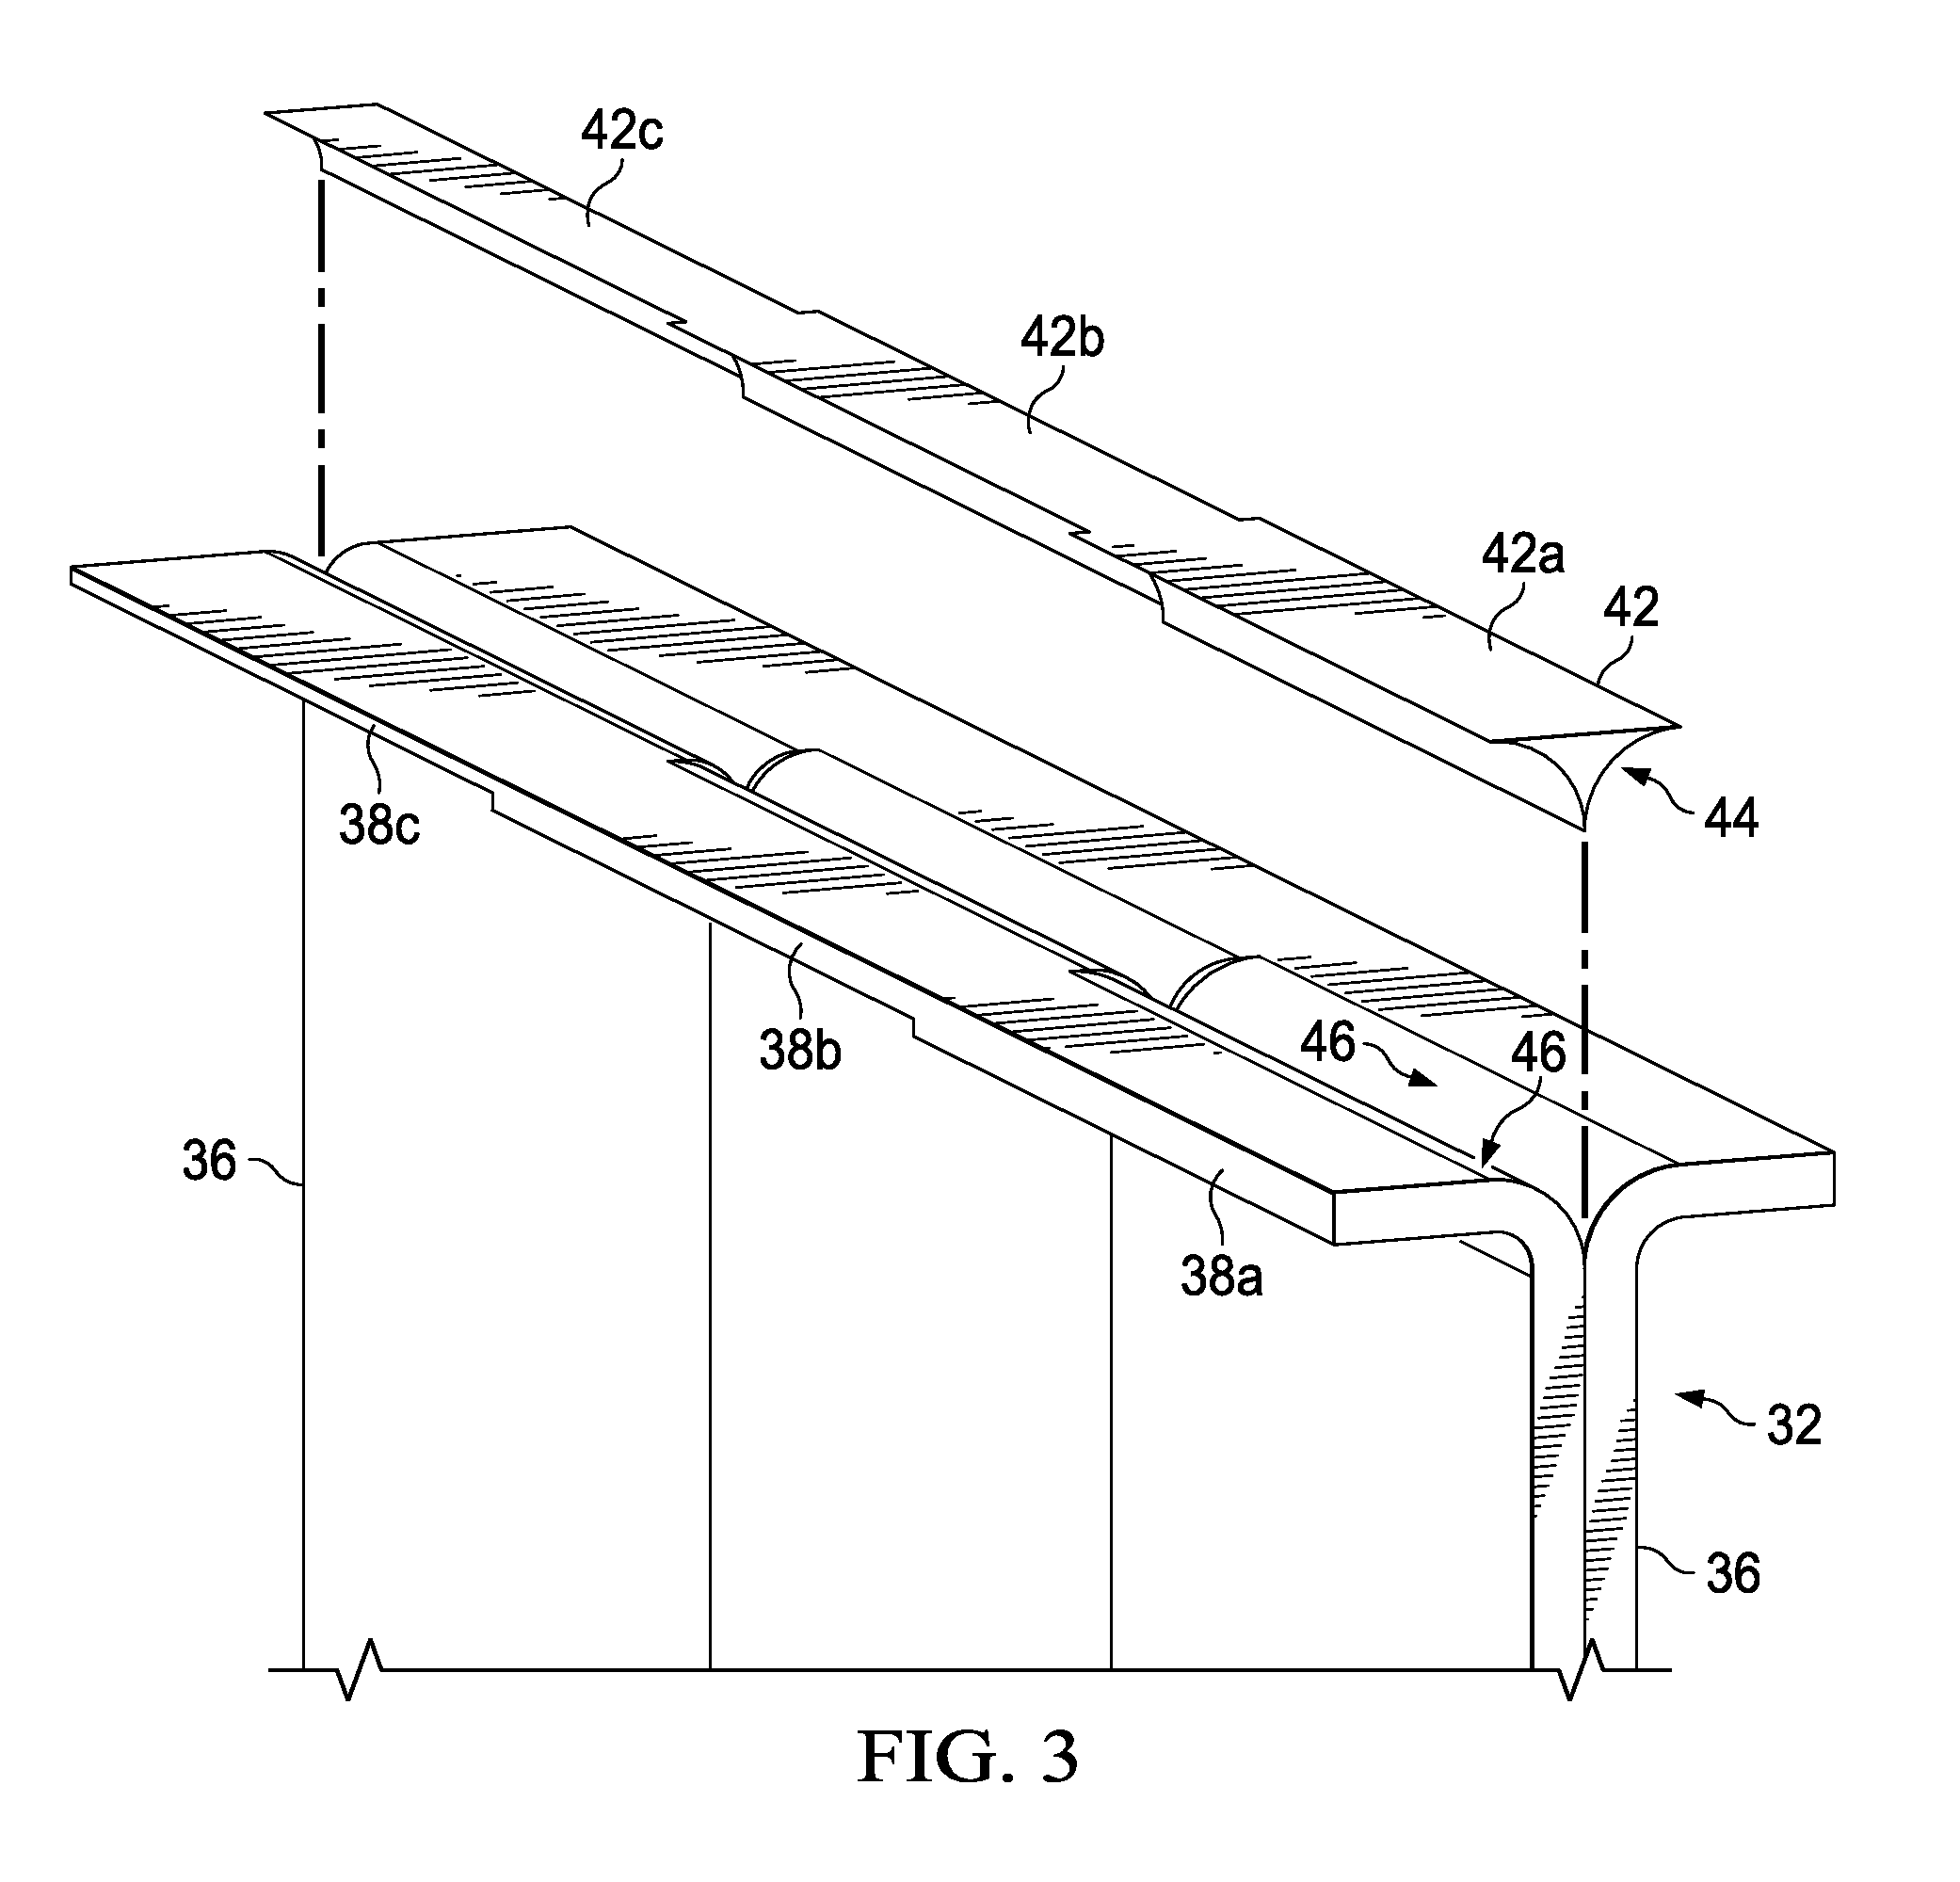 Automated fabrication of composite fillers